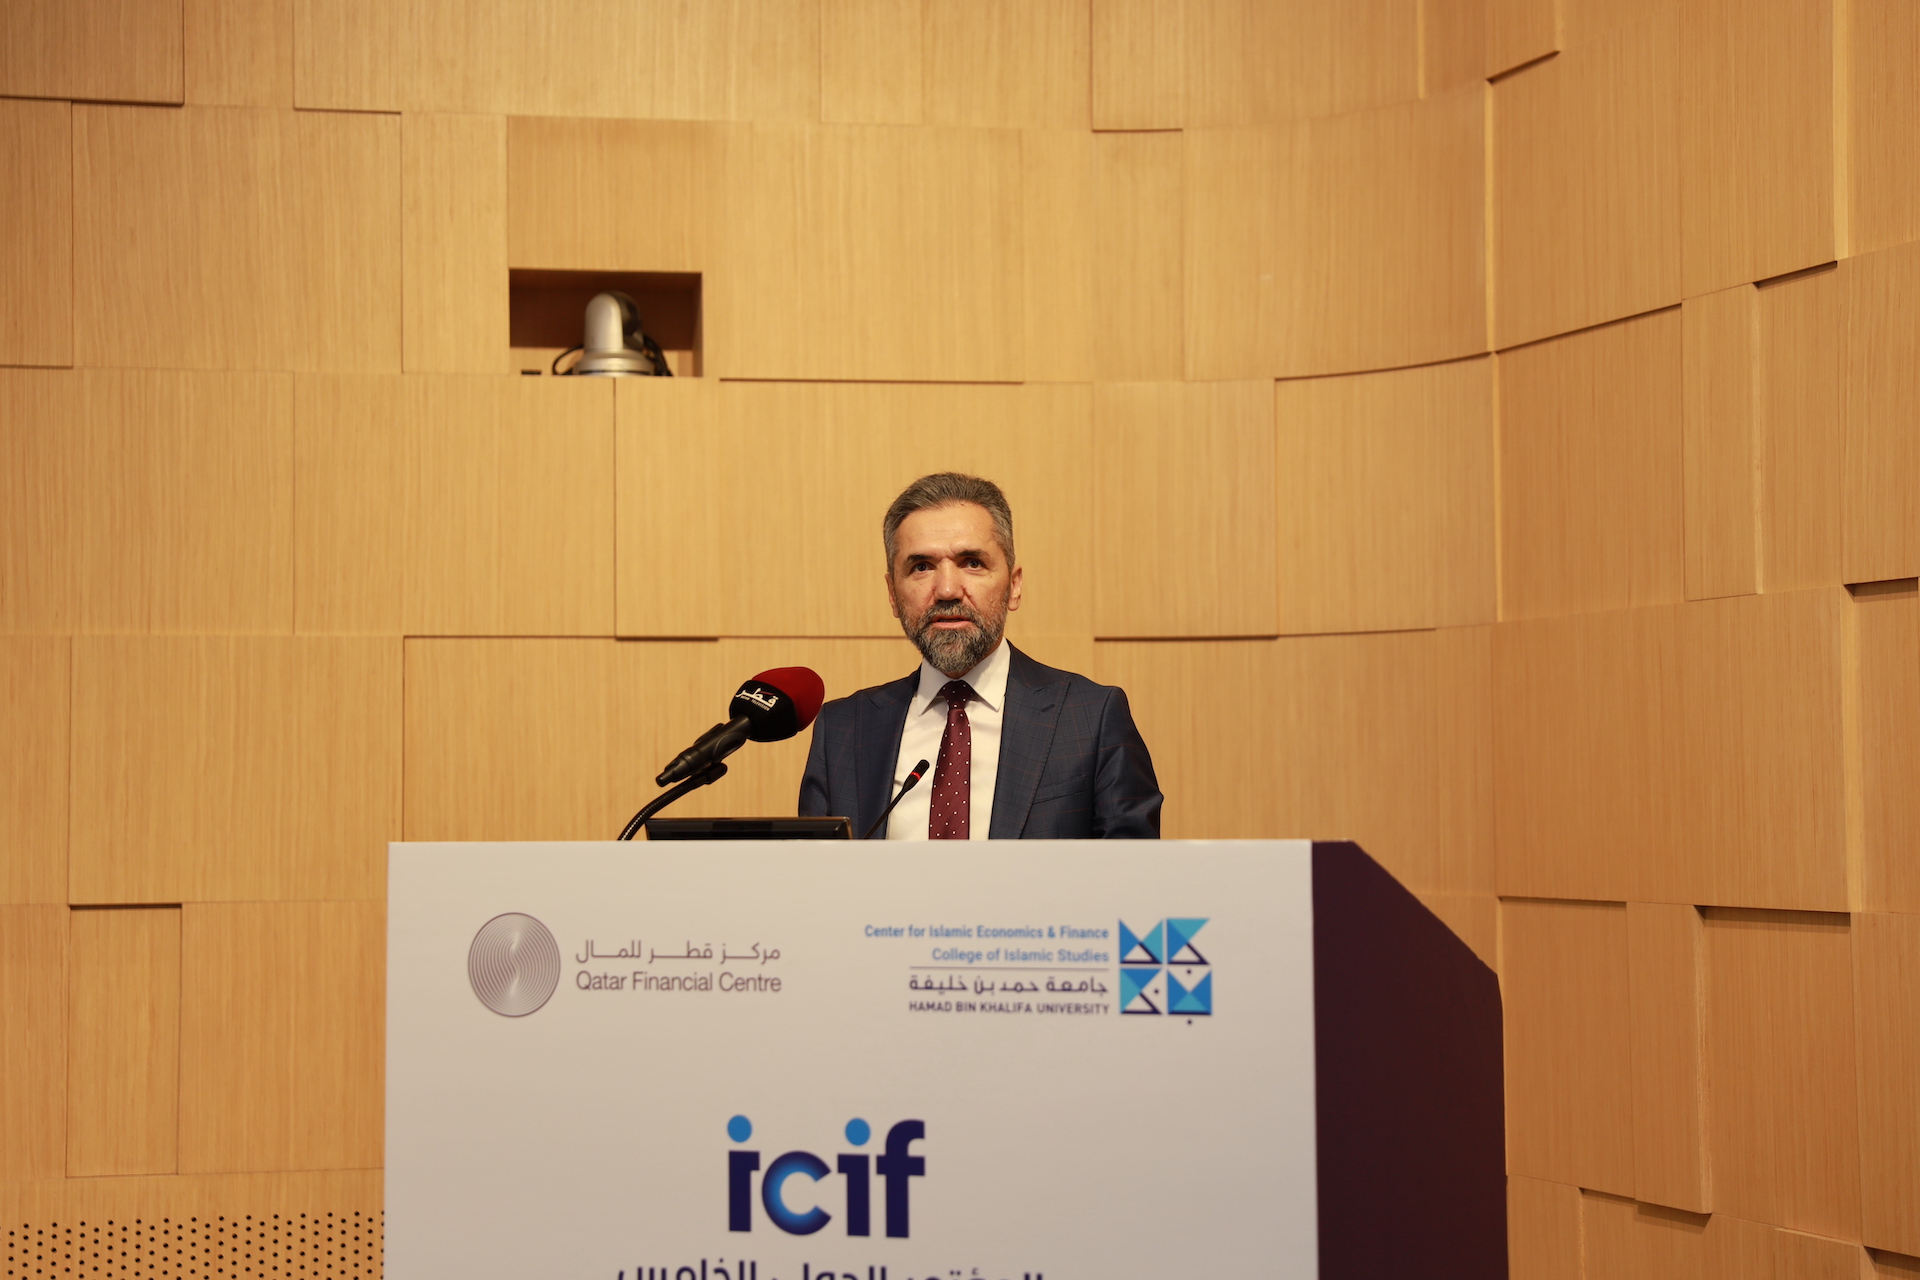 CIS Hosts International Conference for Islamic Finance 2022